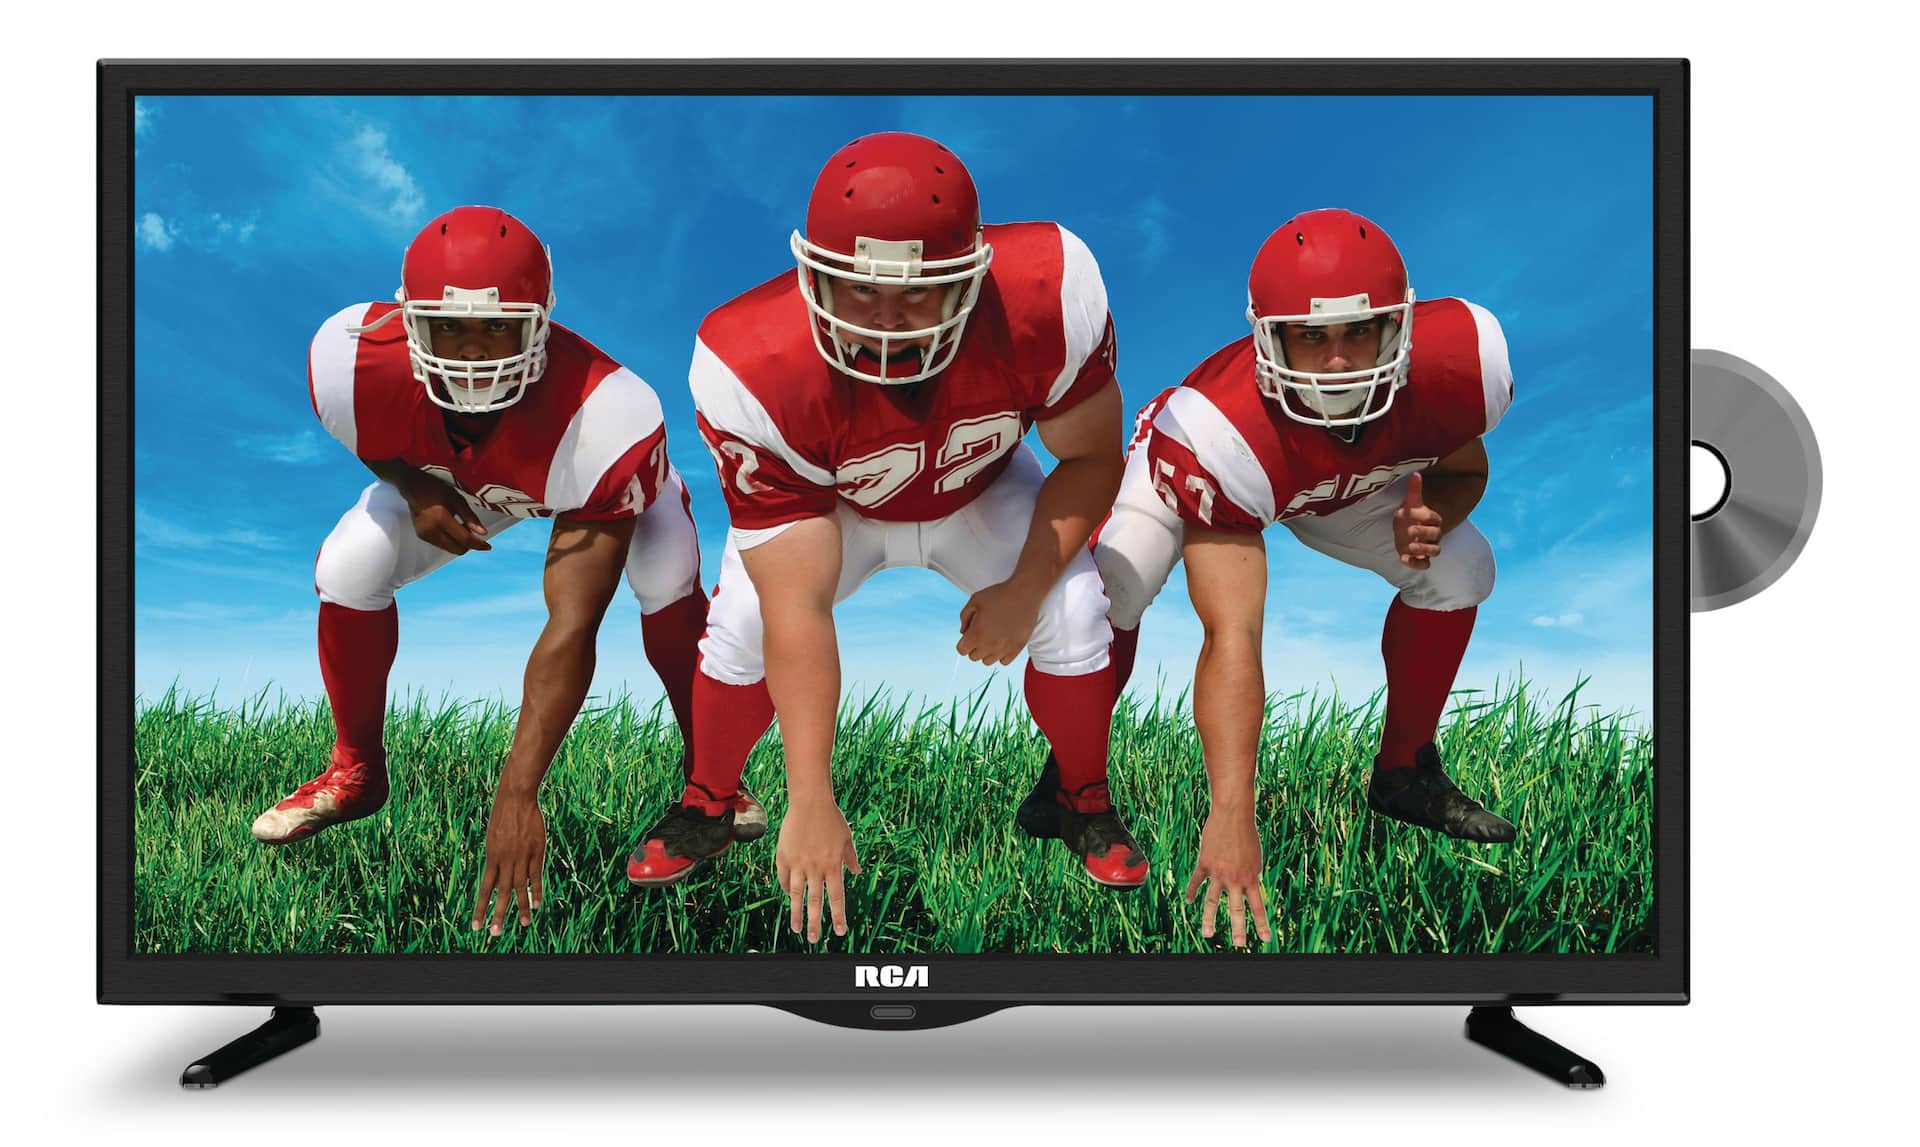 https://media-www.canadiantire.ca/product/living/electronics/home-entertainment-systems/0452093/rca-24-led-tv-dvd-combo-5ca244f1-2e8b-45f3-8a2d-32b50b1f0b12-jpgrendition.jpg